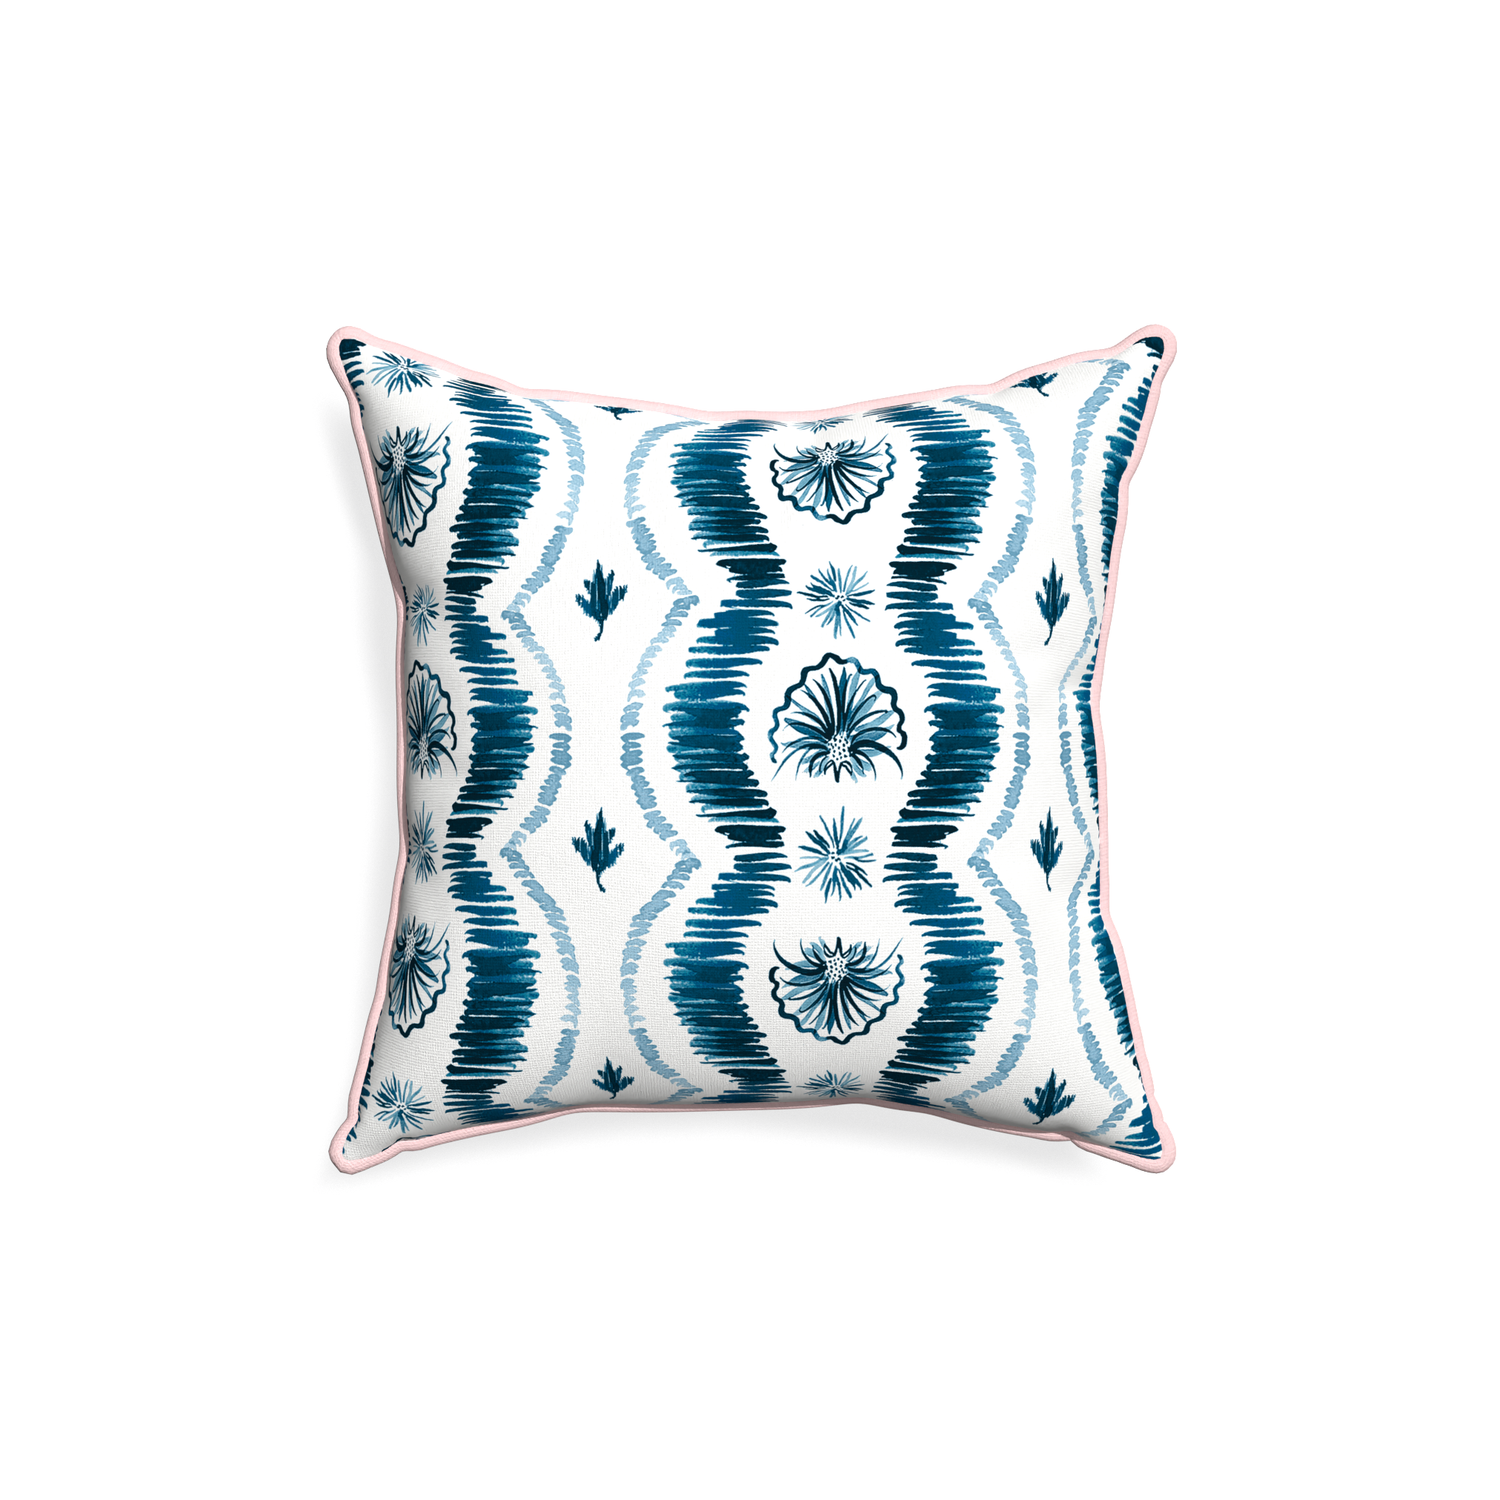 18-square alice custom blue ikatpillow with petal piping on white background